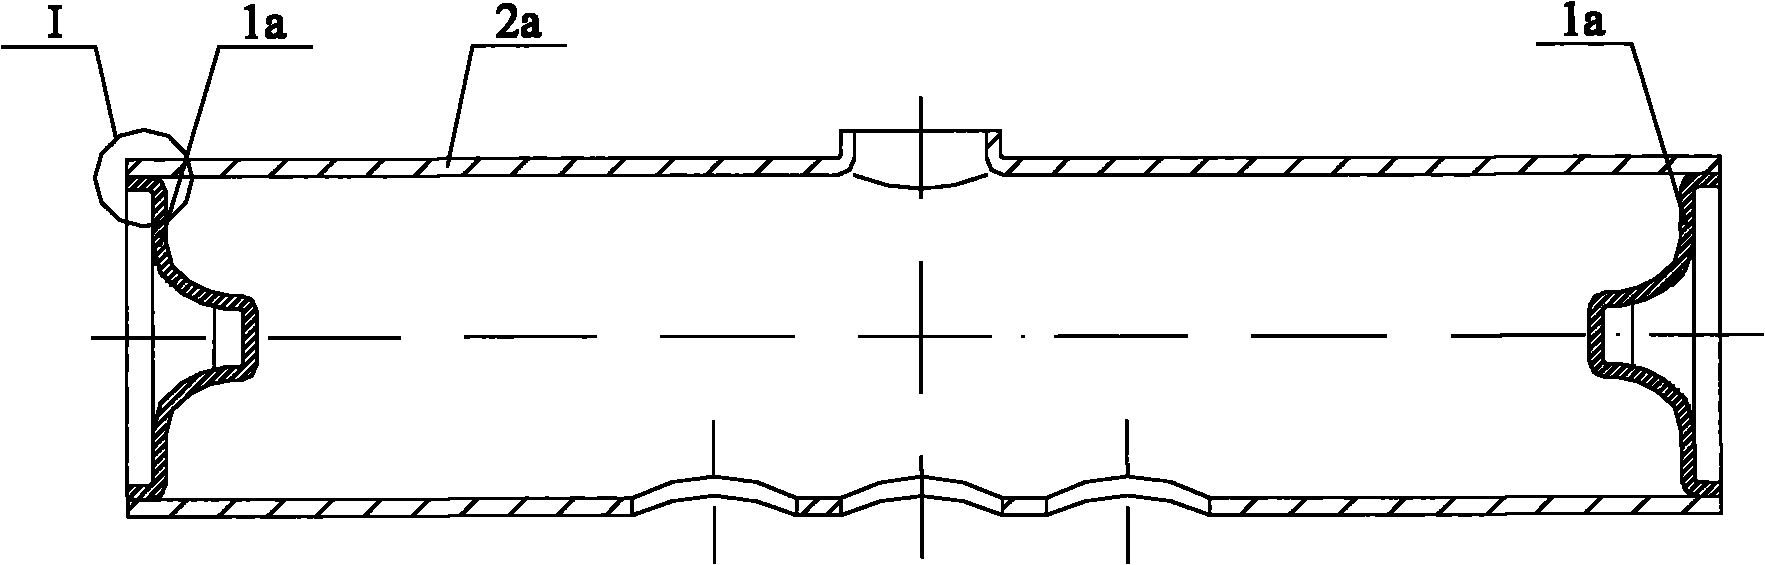 End cover as well as main valve of four-way reversing valve and four-way reversing valve using same